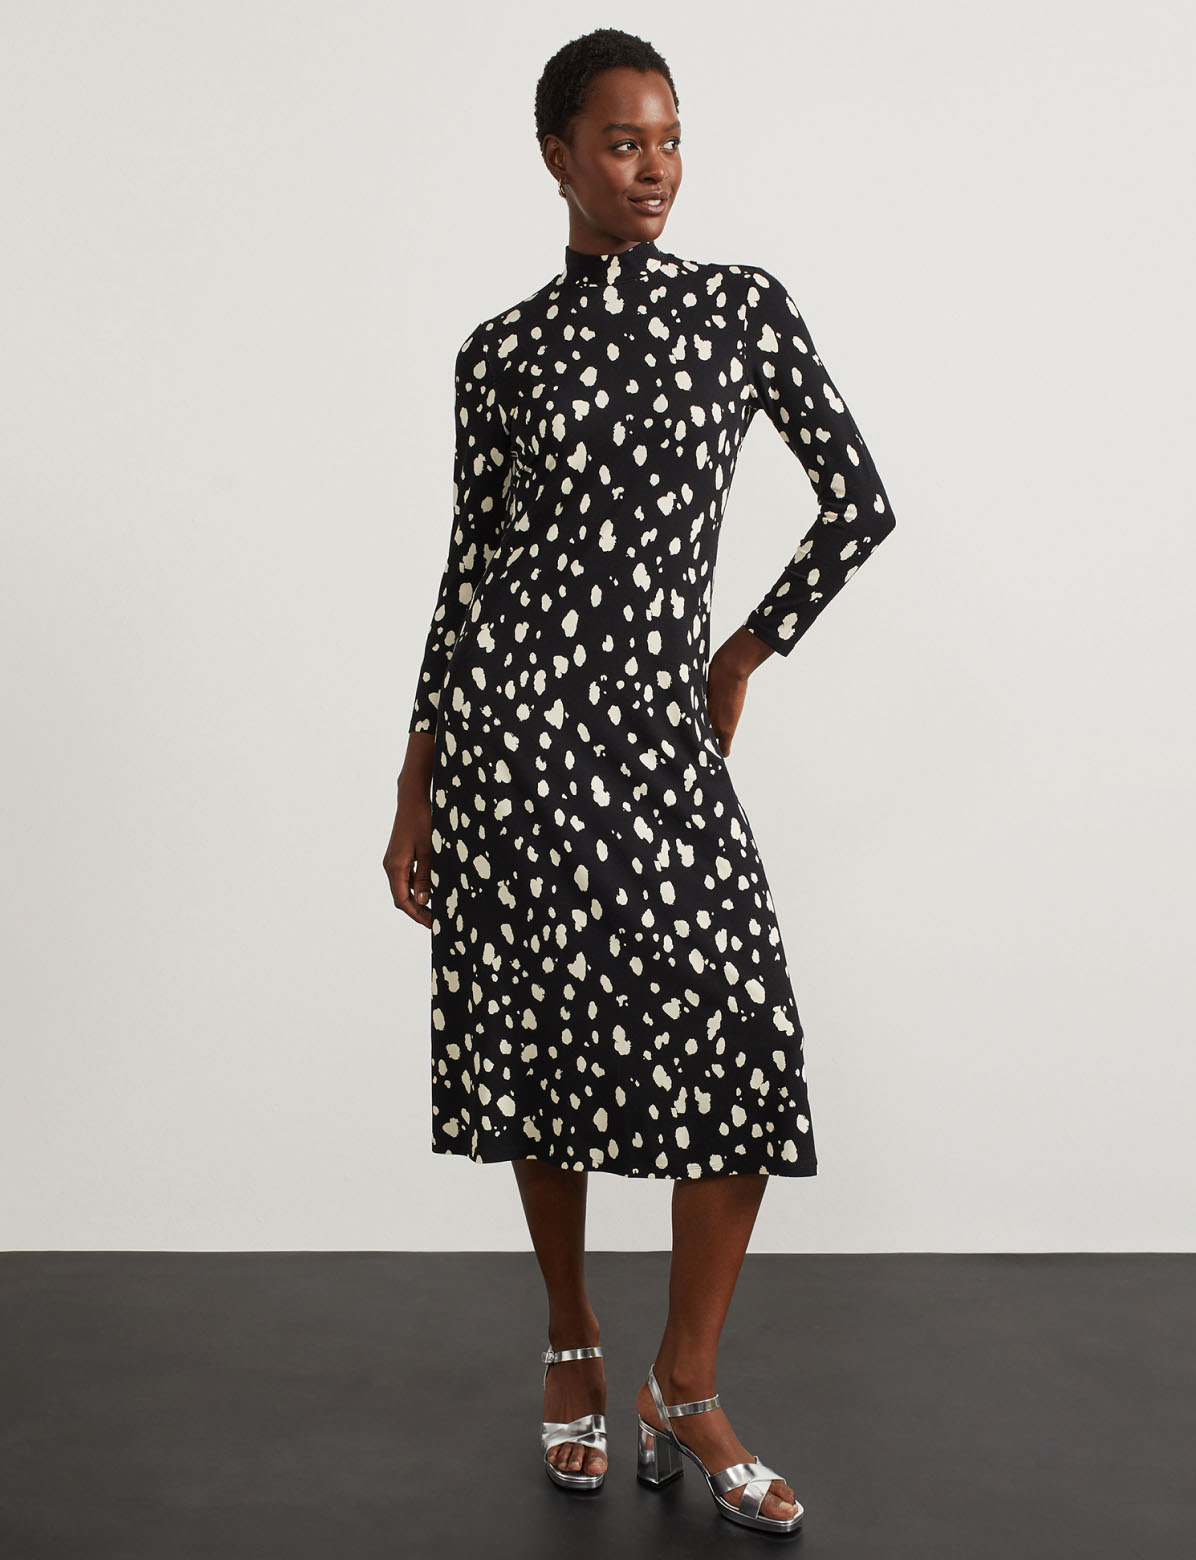 Hobbs Limited Edition Floral Dress